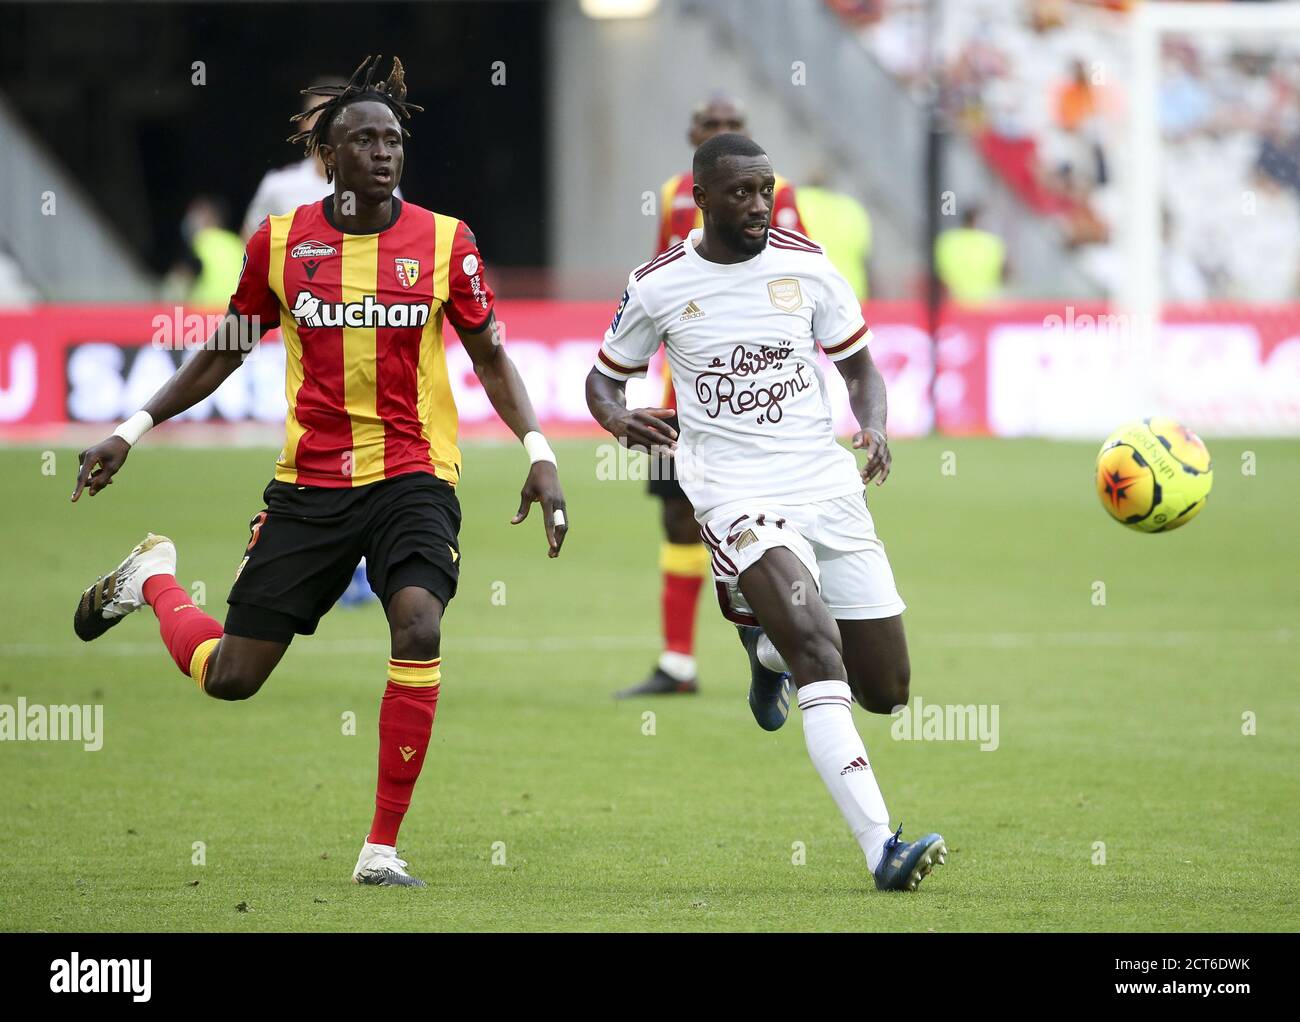 Youssouf Sabaly of Bordeaux, Issiaga Sylla of Lens (left) during the French championship Ligue 1 football match between RC Lens and Girondins de Borde Stock Photo